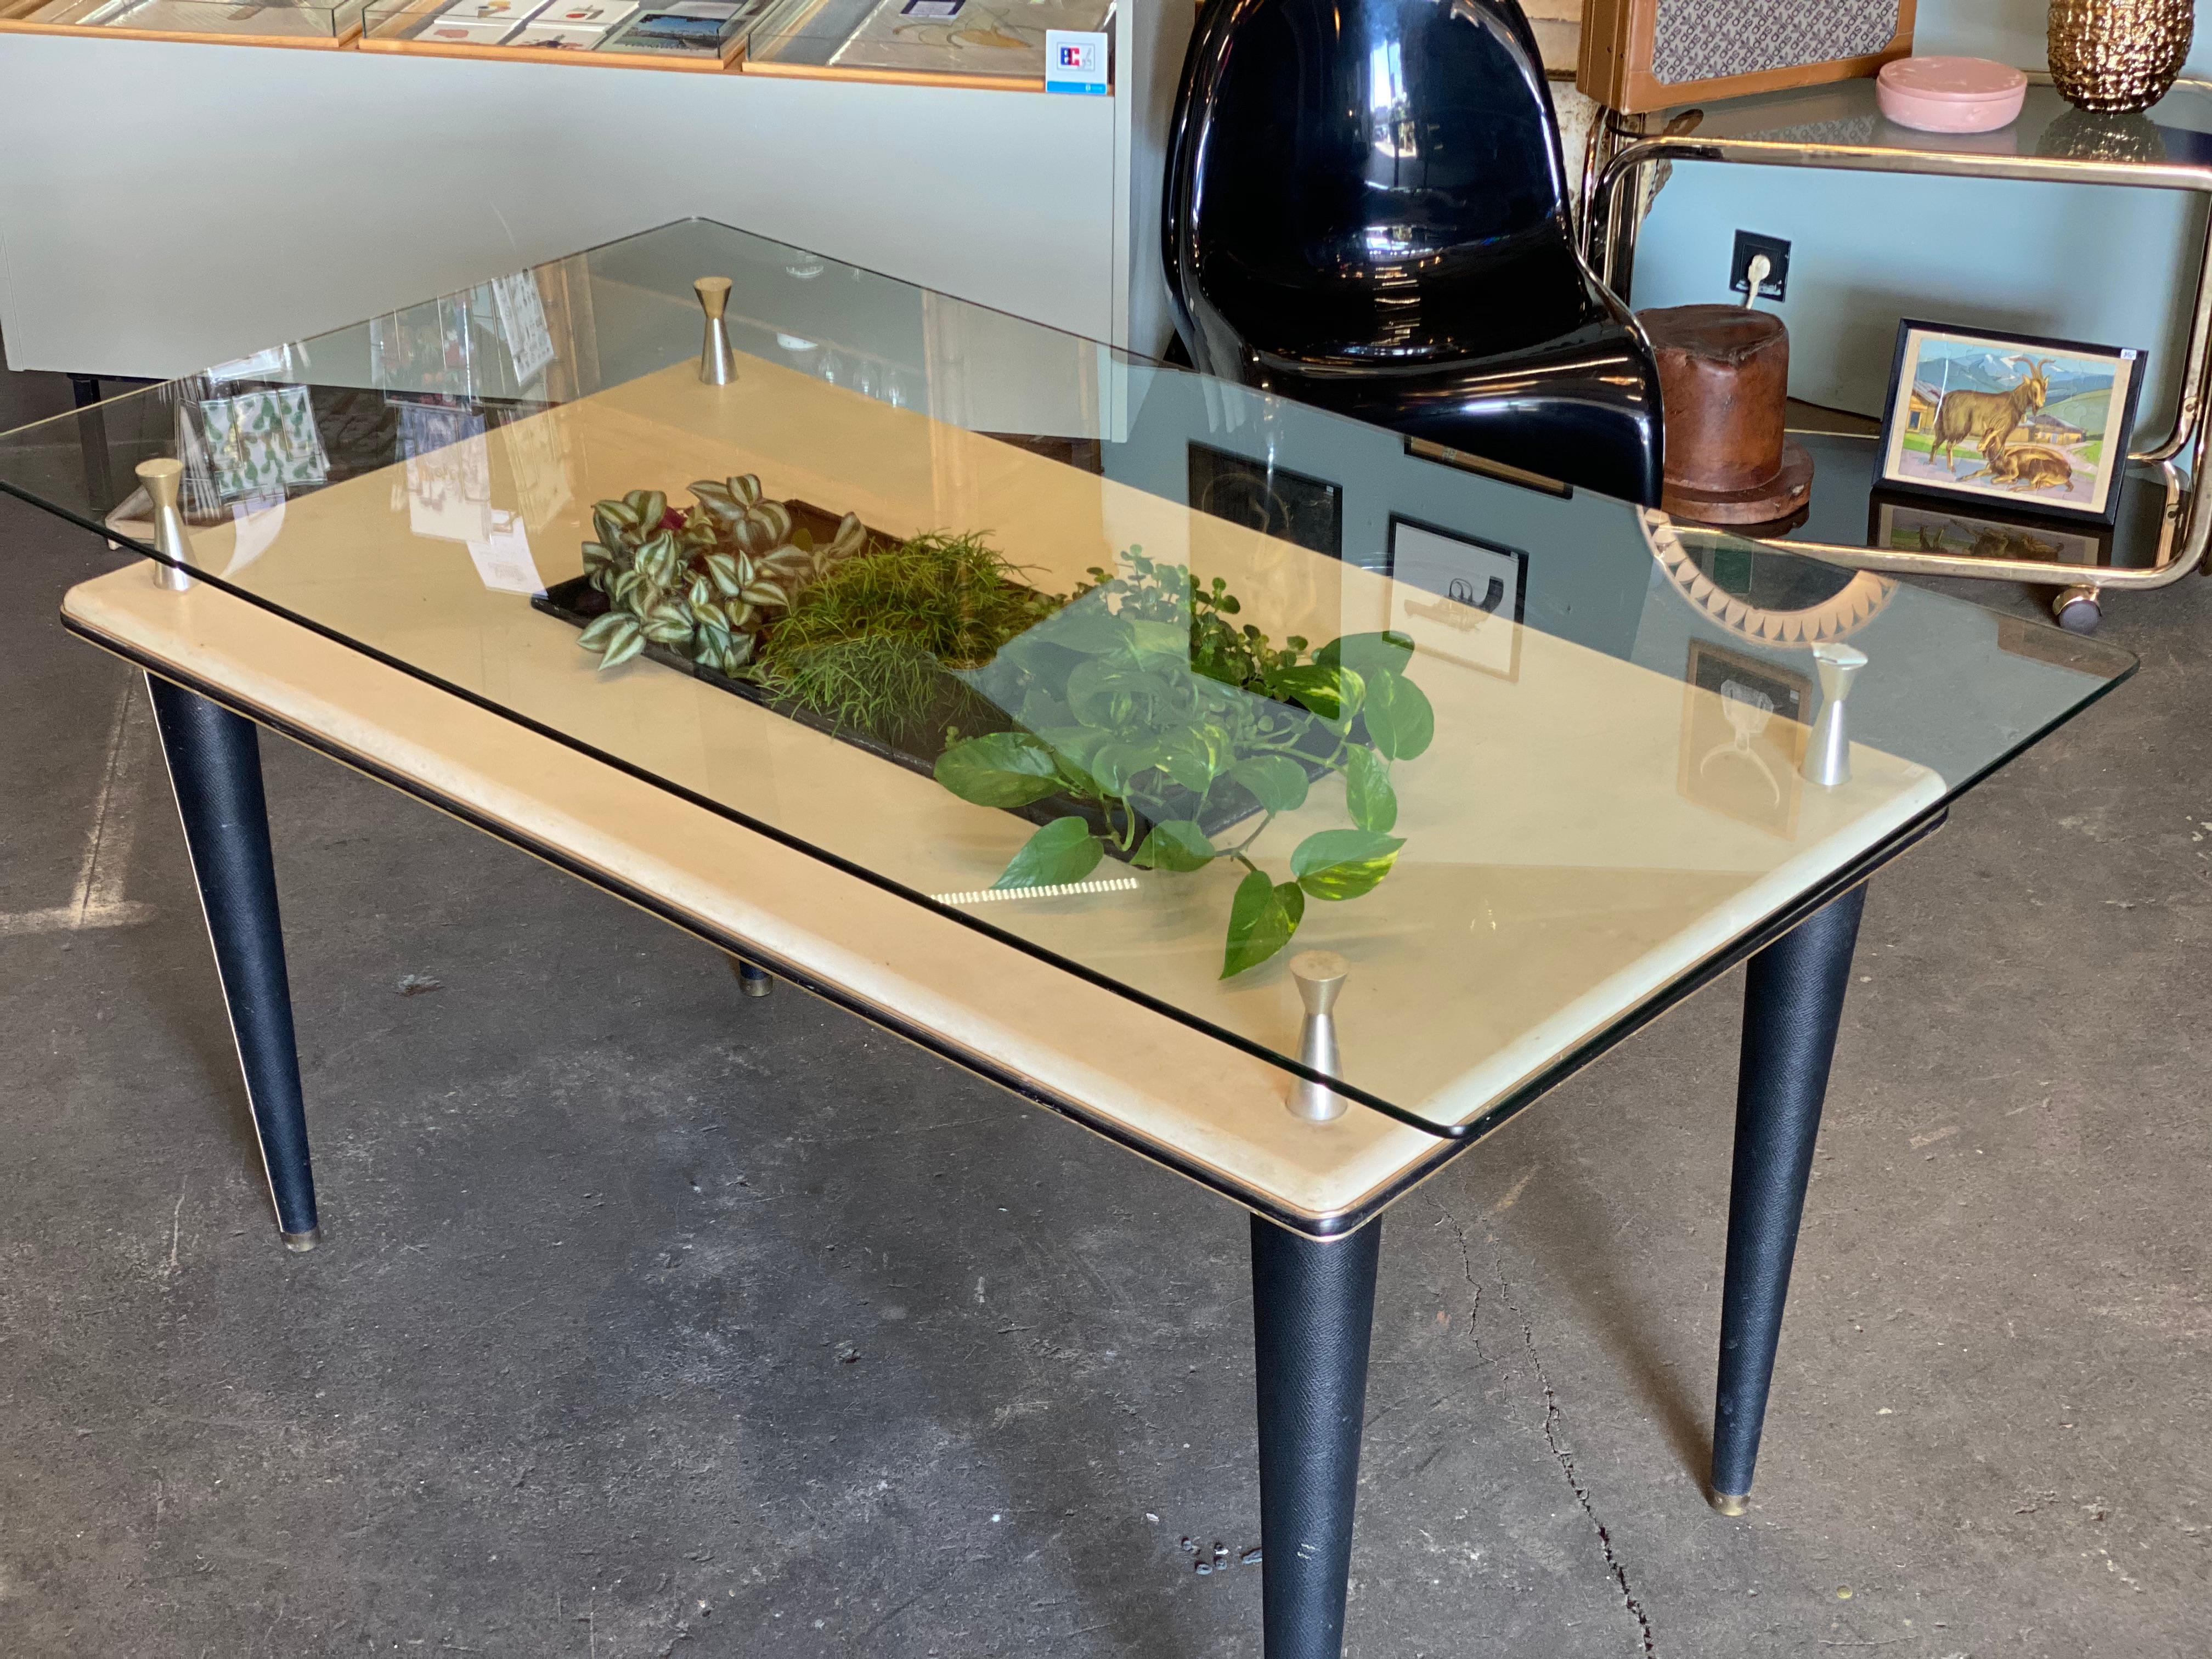 This dining table was produced in Italy during the 1950s and features a glass top with a central basin. The top and legs feature skai, as do the edges of the piece in the form of a trim around the border. The glass top and top of the frame are